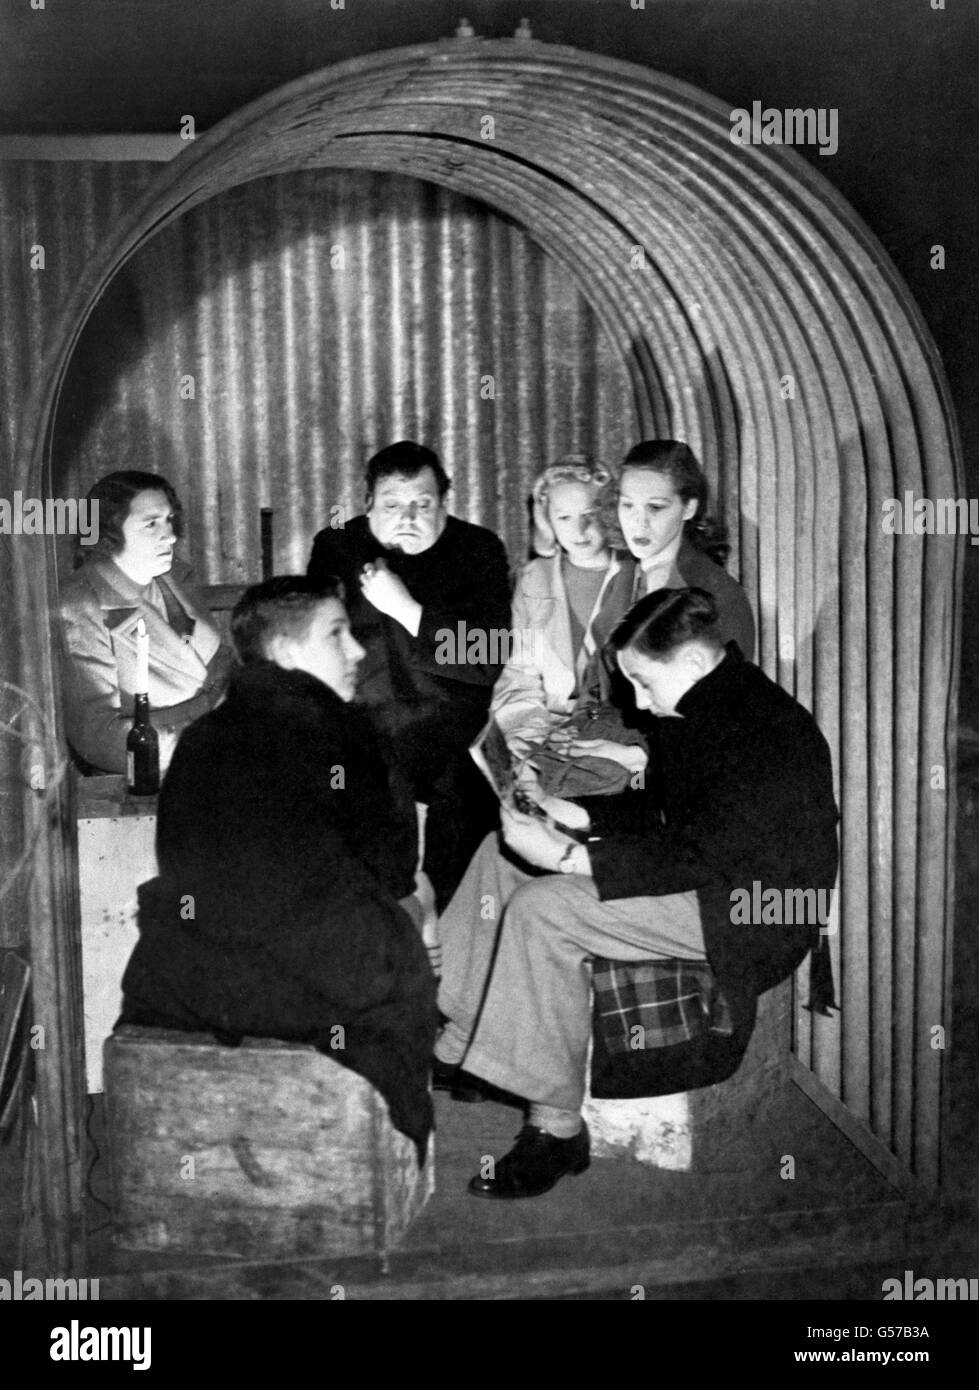 World War Two - British Empire - The Home Front - The Blitz - Shelters - London - 1940 Stock Photo